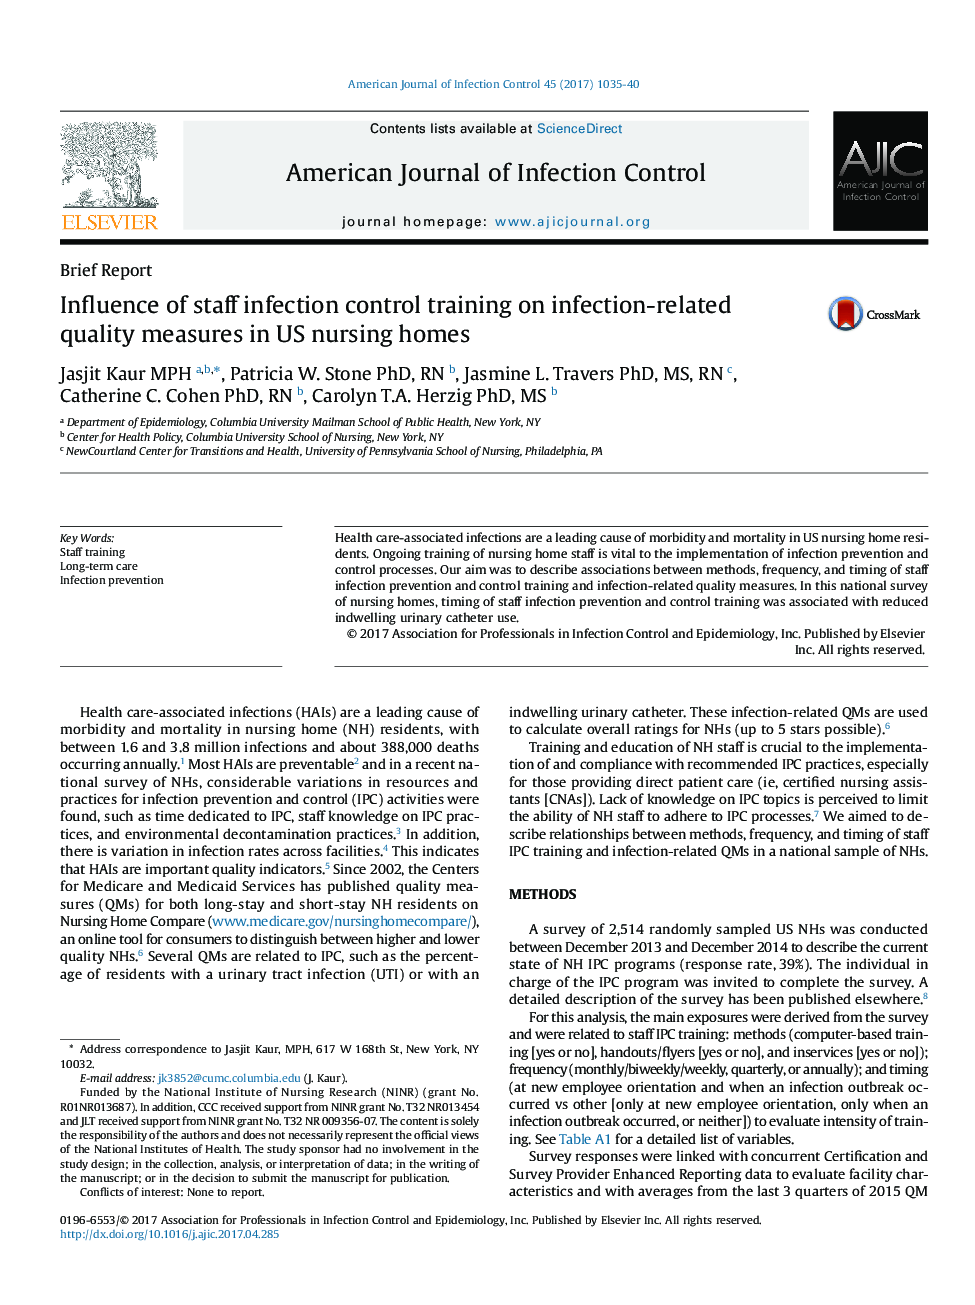 Influence of staff infection control training on infection-related quality measures in US nursing homes